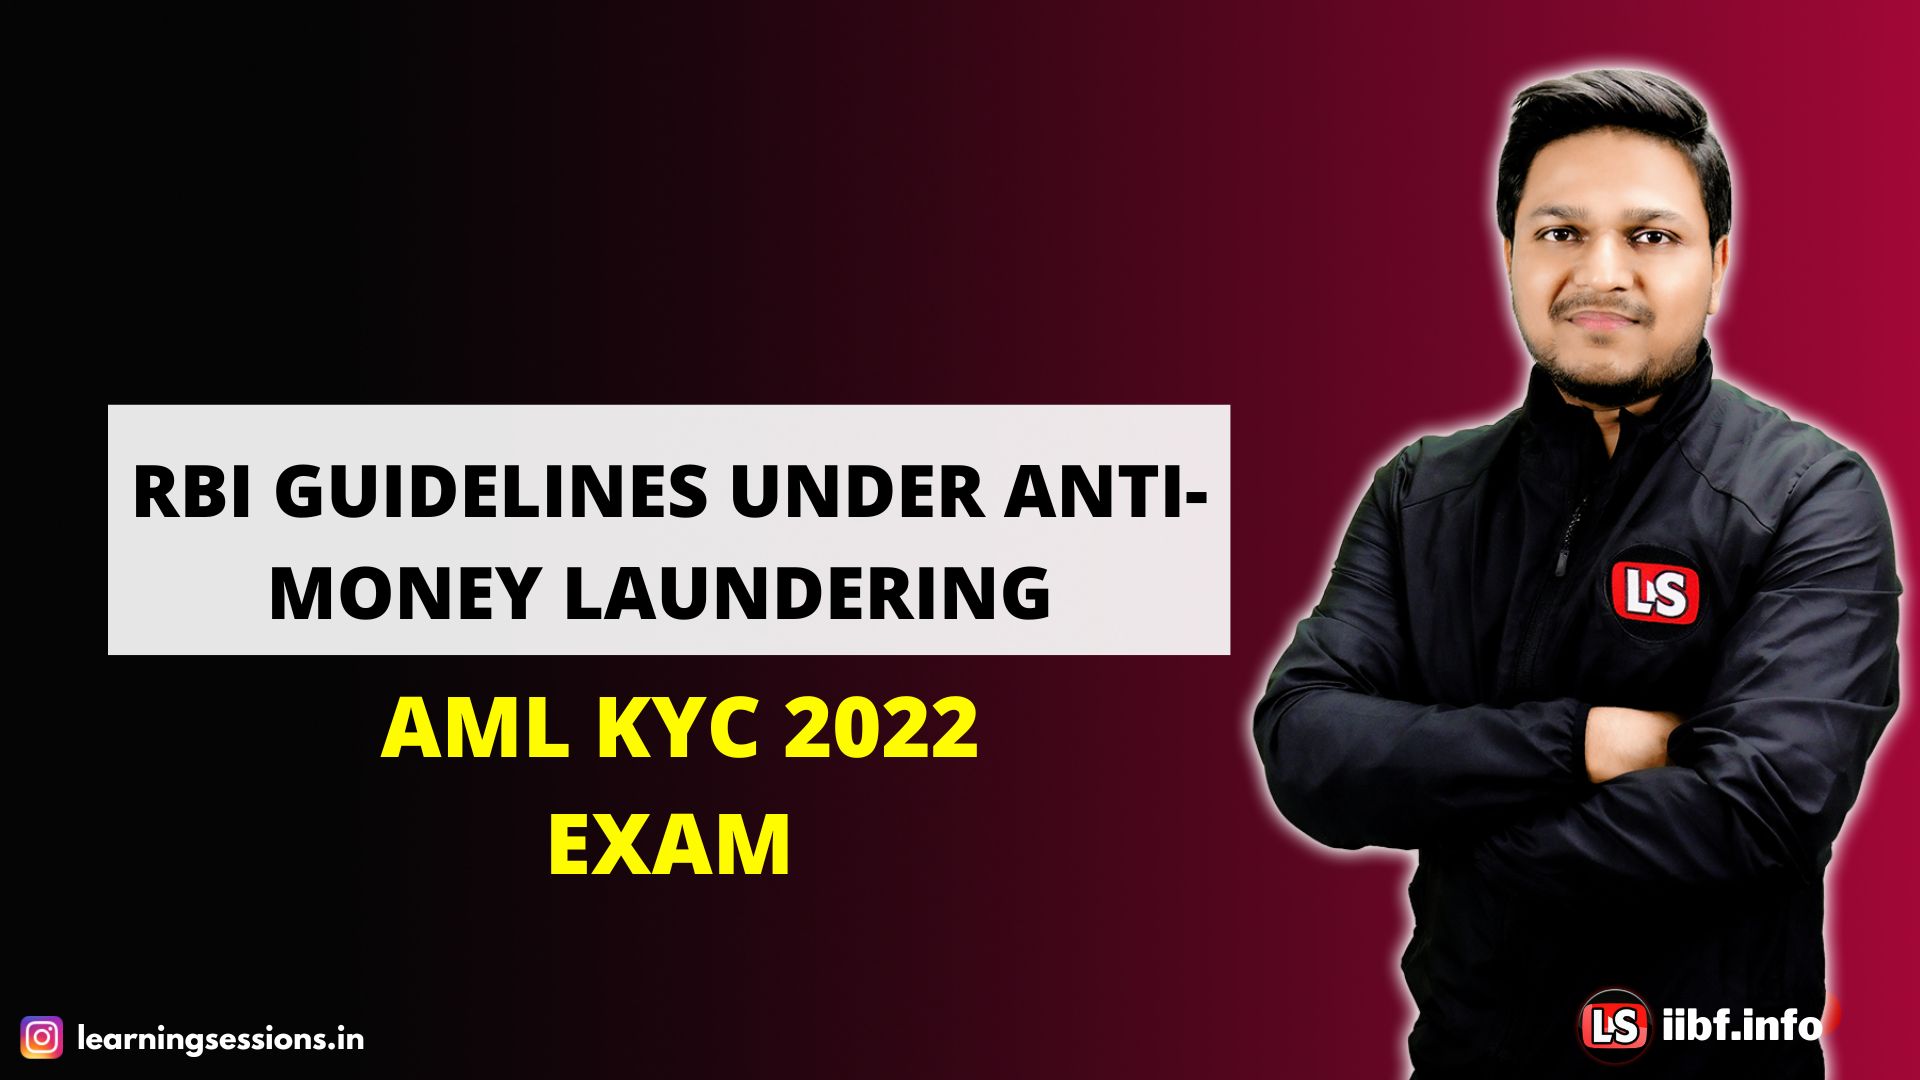 RBI GUIDELINES UNDER ANTI-MONEY LAUNDERING | AML KYC 2022 EXAMS | LATEST NOTES & STUDY MATERIAL